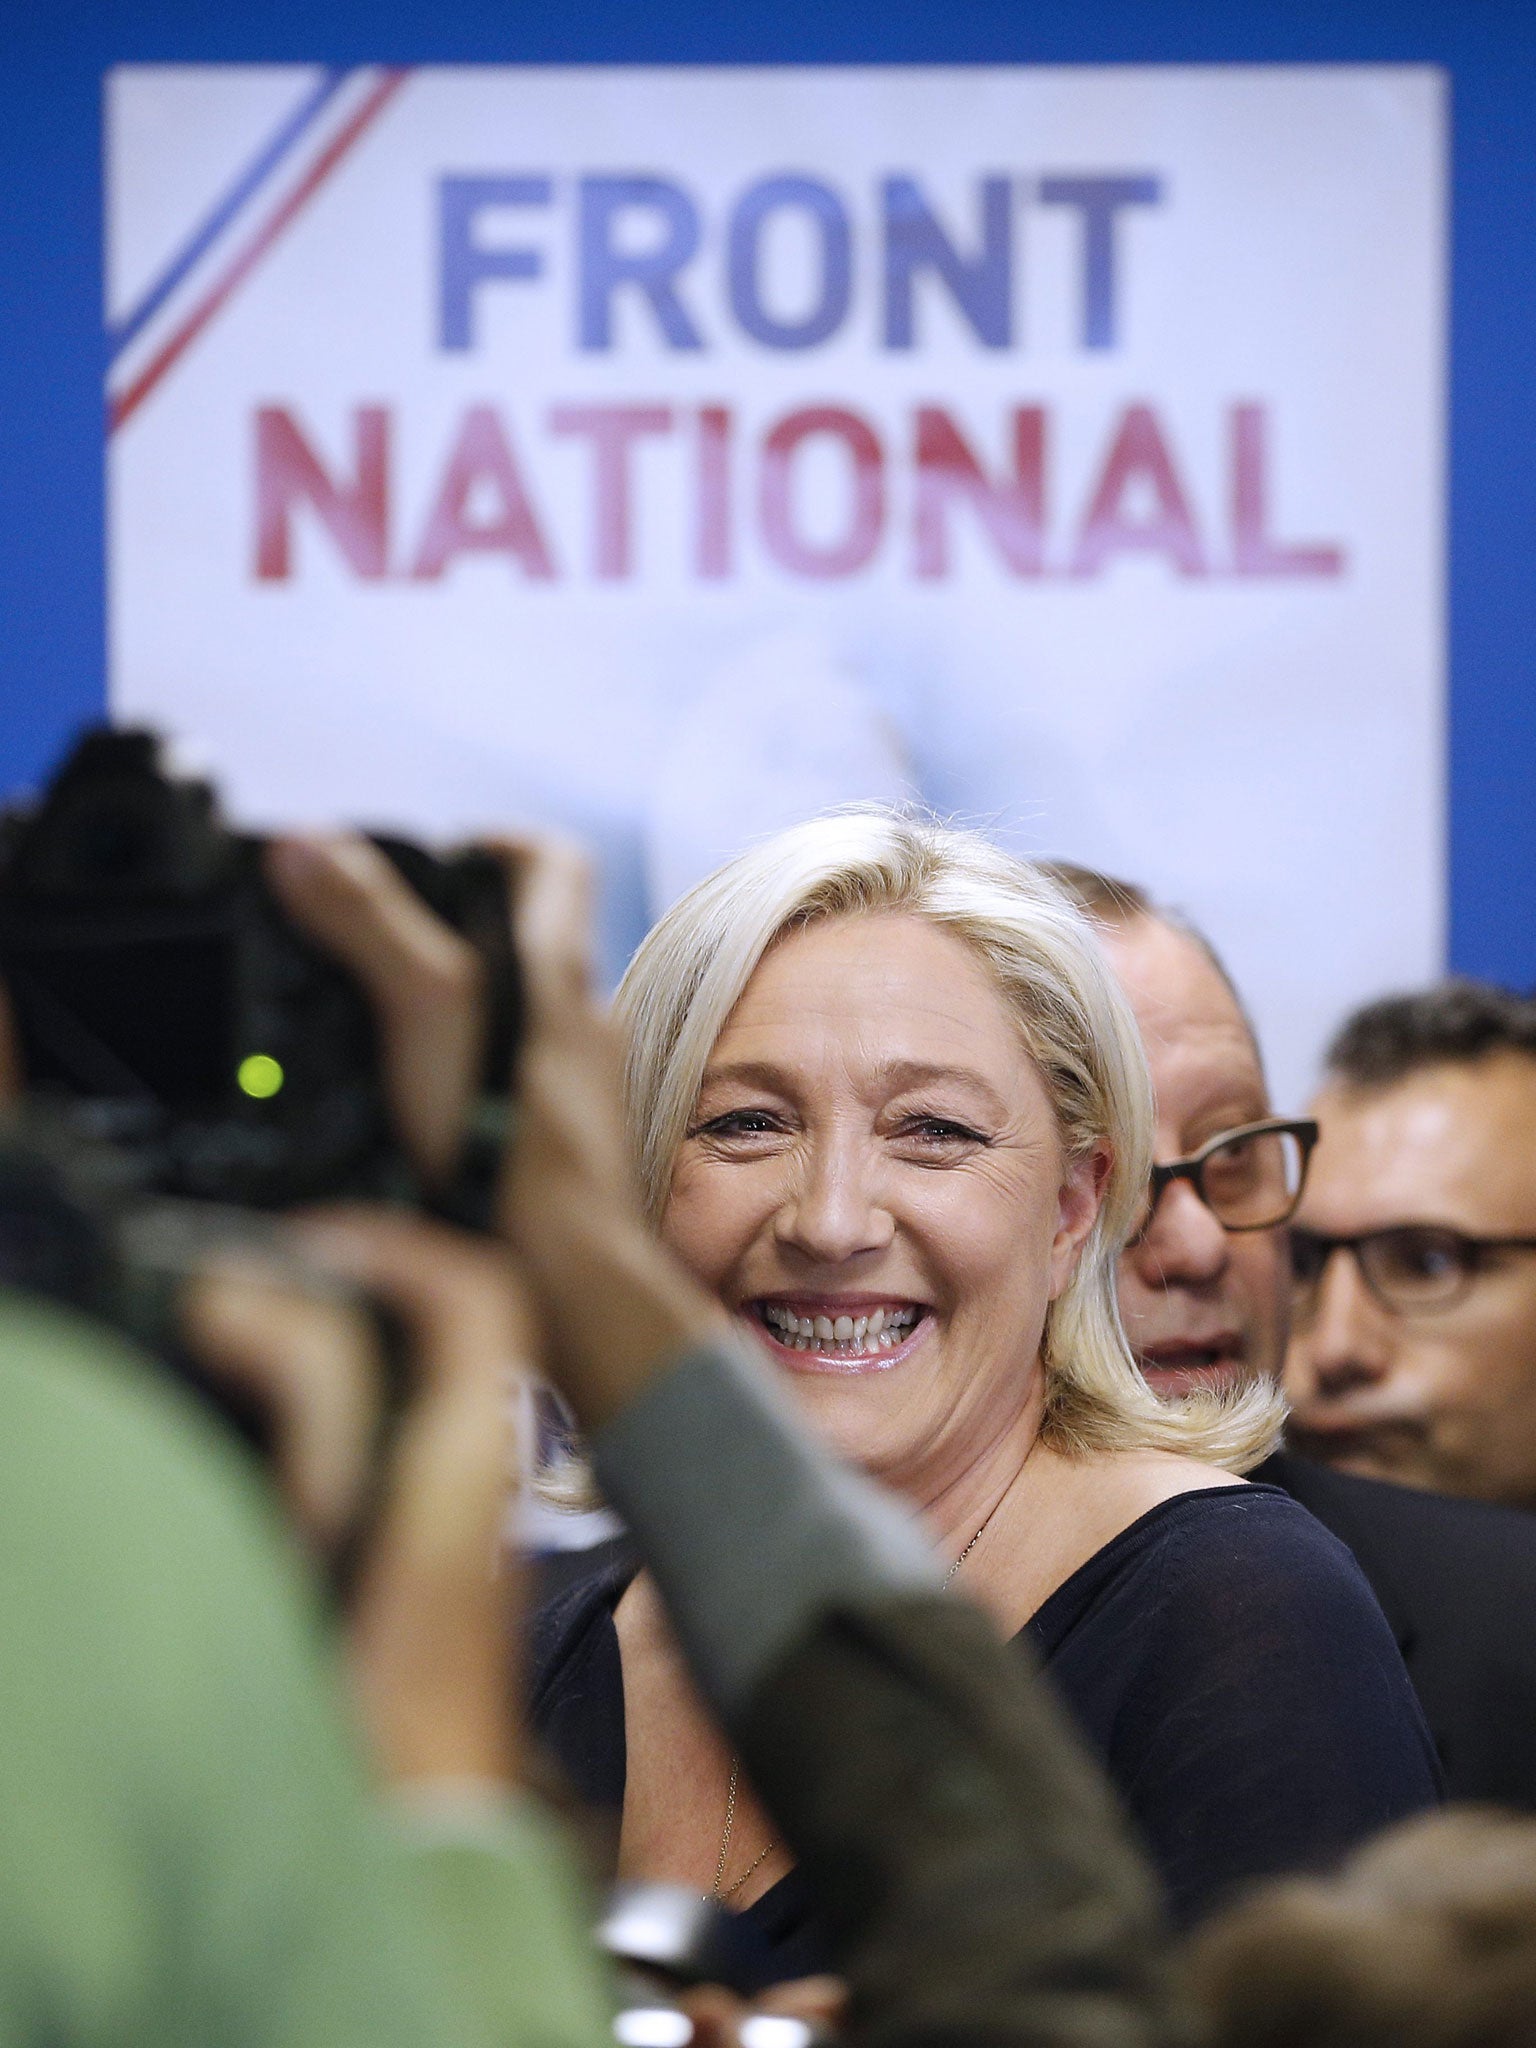 Marine Le Pen’s Front National topped a nationwide poll for the first time in its history, with the anti-immigrant party predicted to take 25 per cent of the vote and as many as 24 seats in the European Parliament